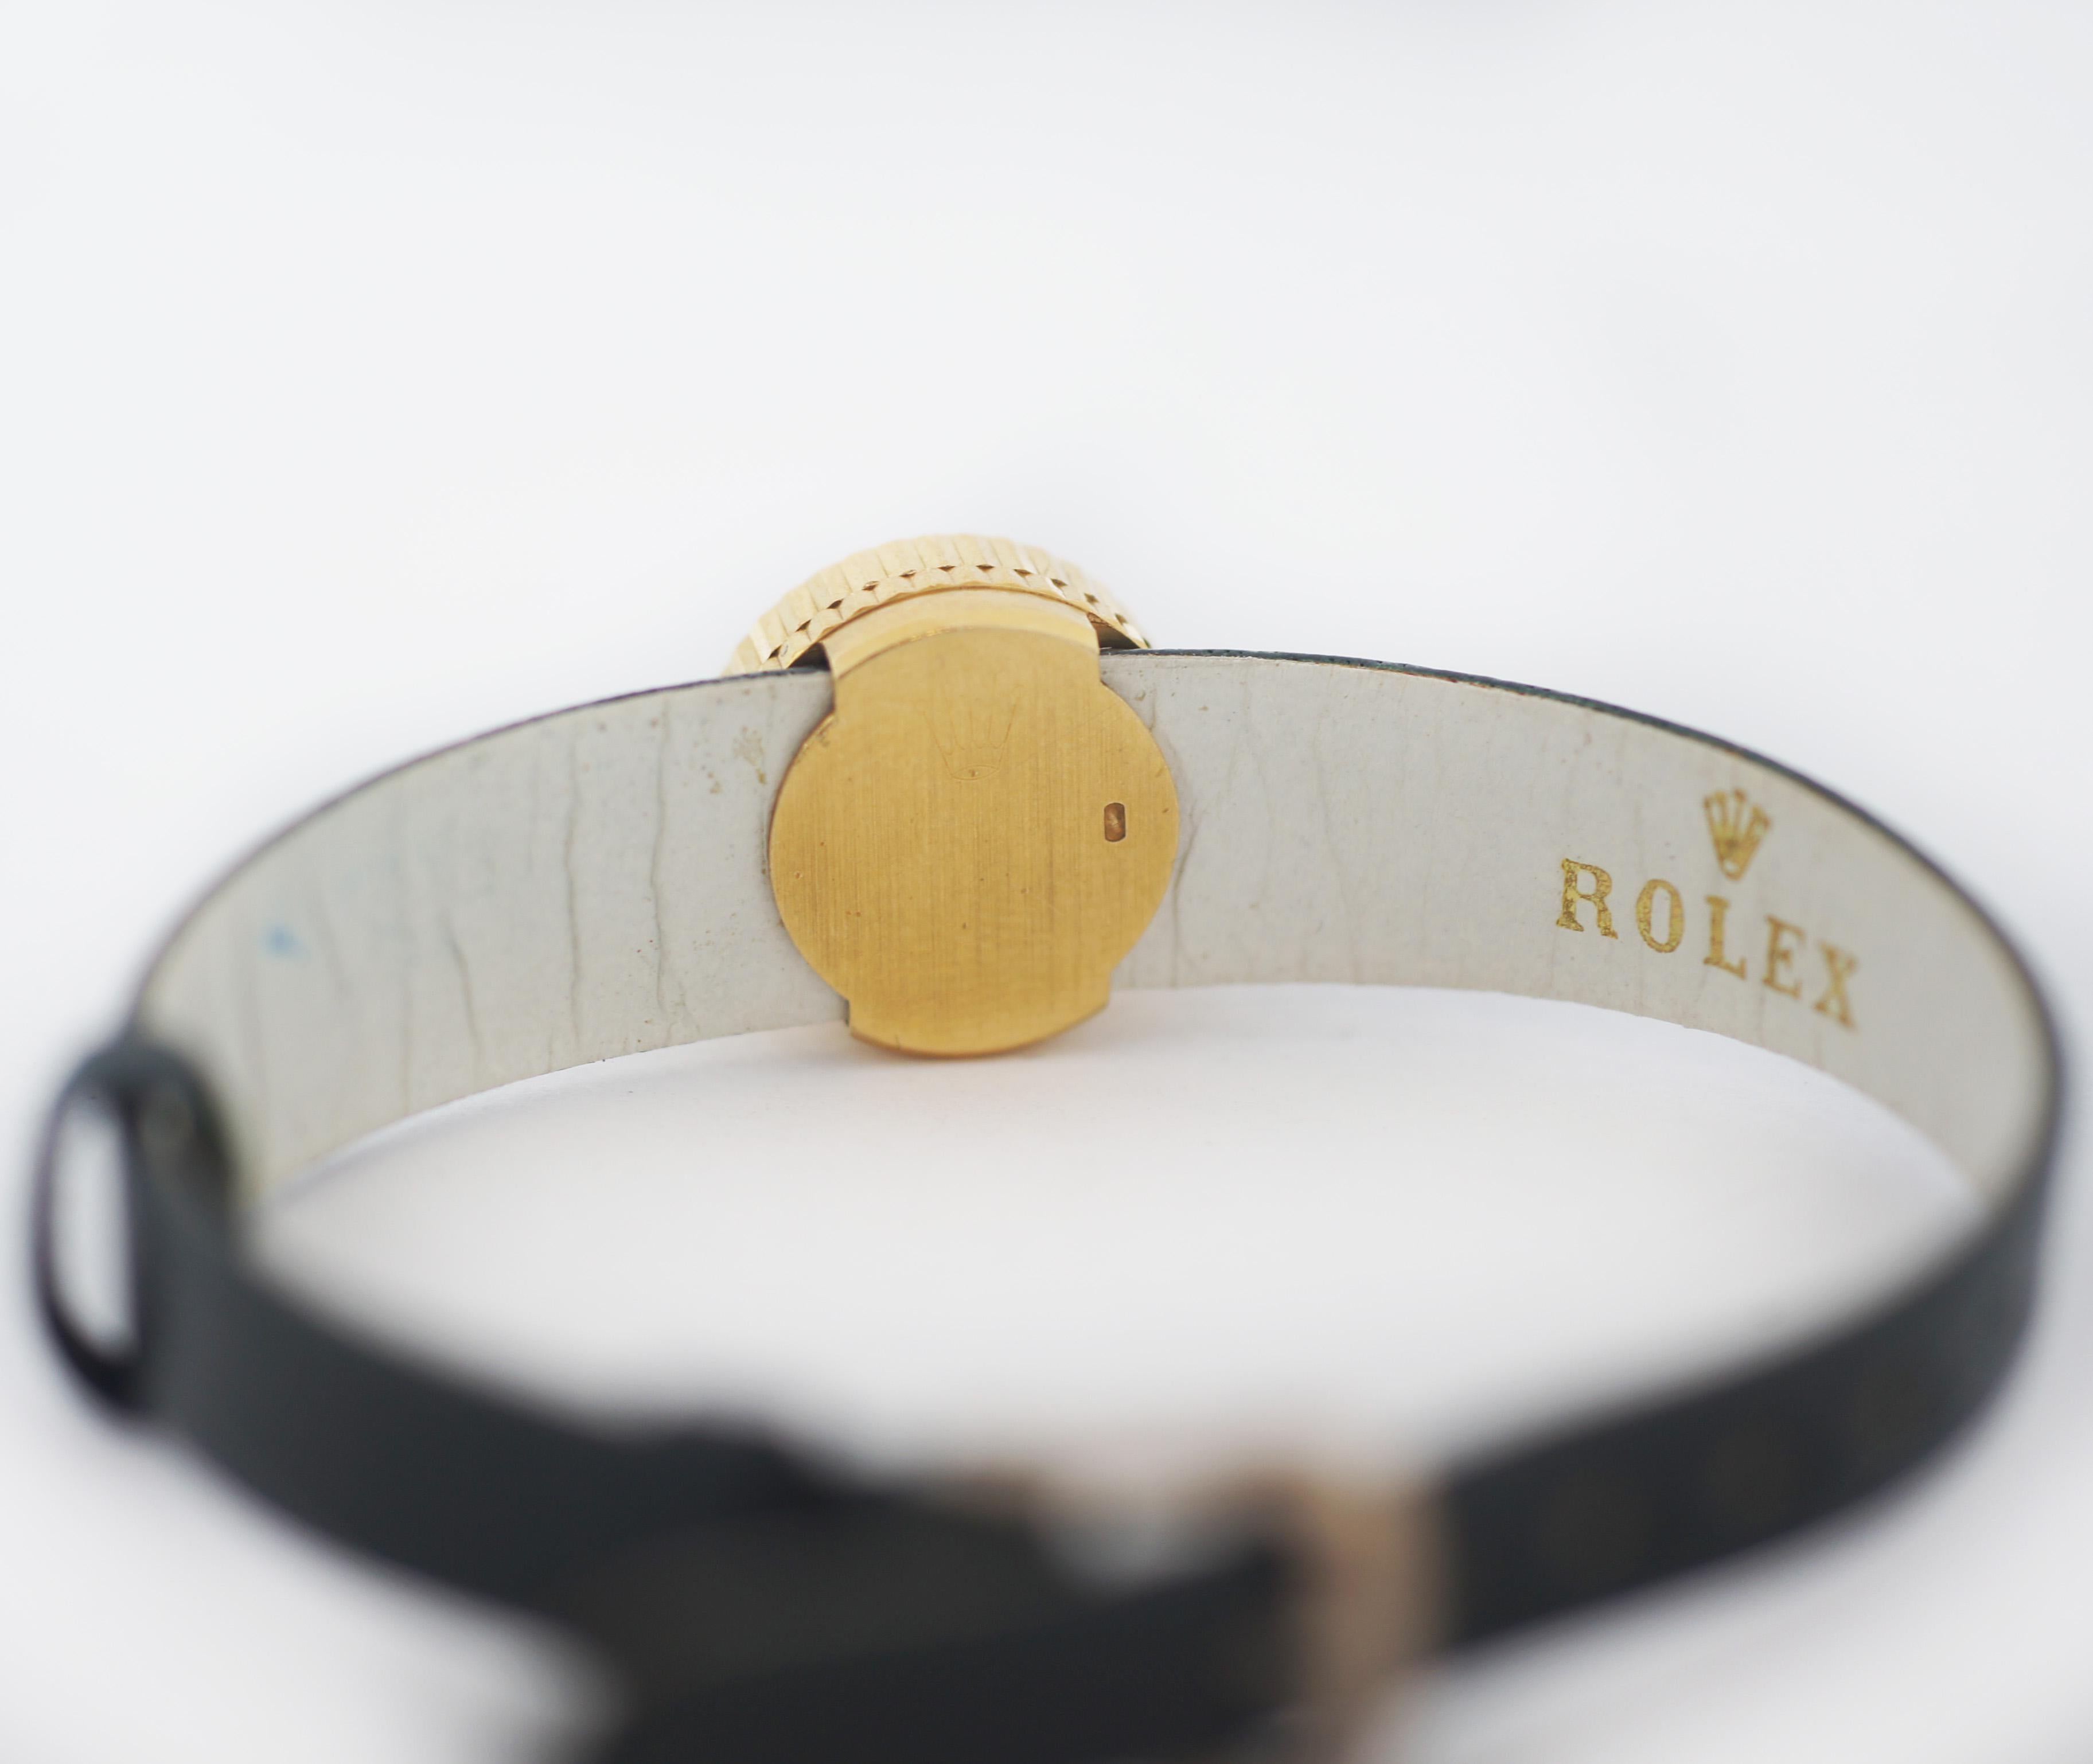 ROLEX Orchid Chameleon 18K Yellow Gold Watch In Good Condition For Sale In San Fernando, CA